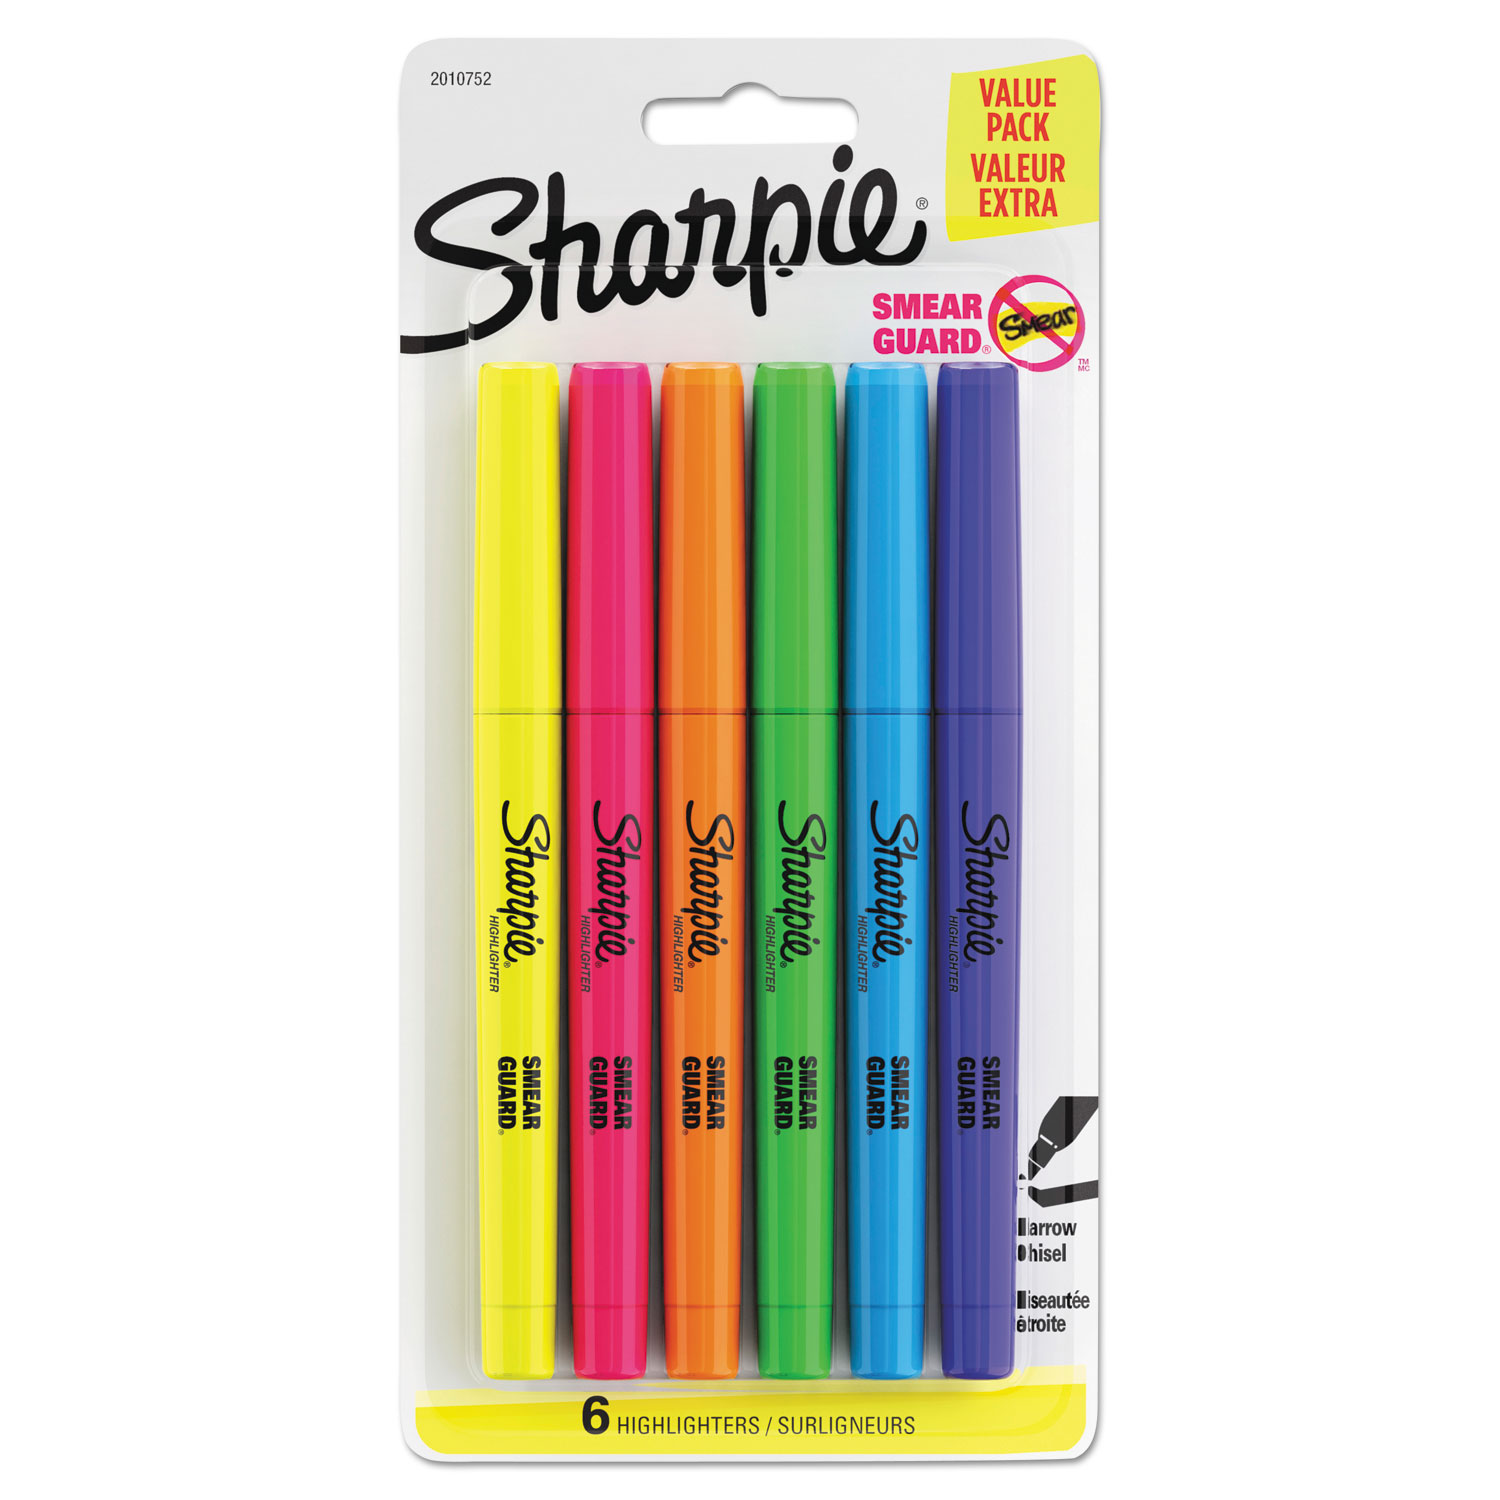  Sharpie 2010752 Pocket Style Highlighters, Chisel Tip, Assorted Colors, 6/Pack (SAN2010752) 